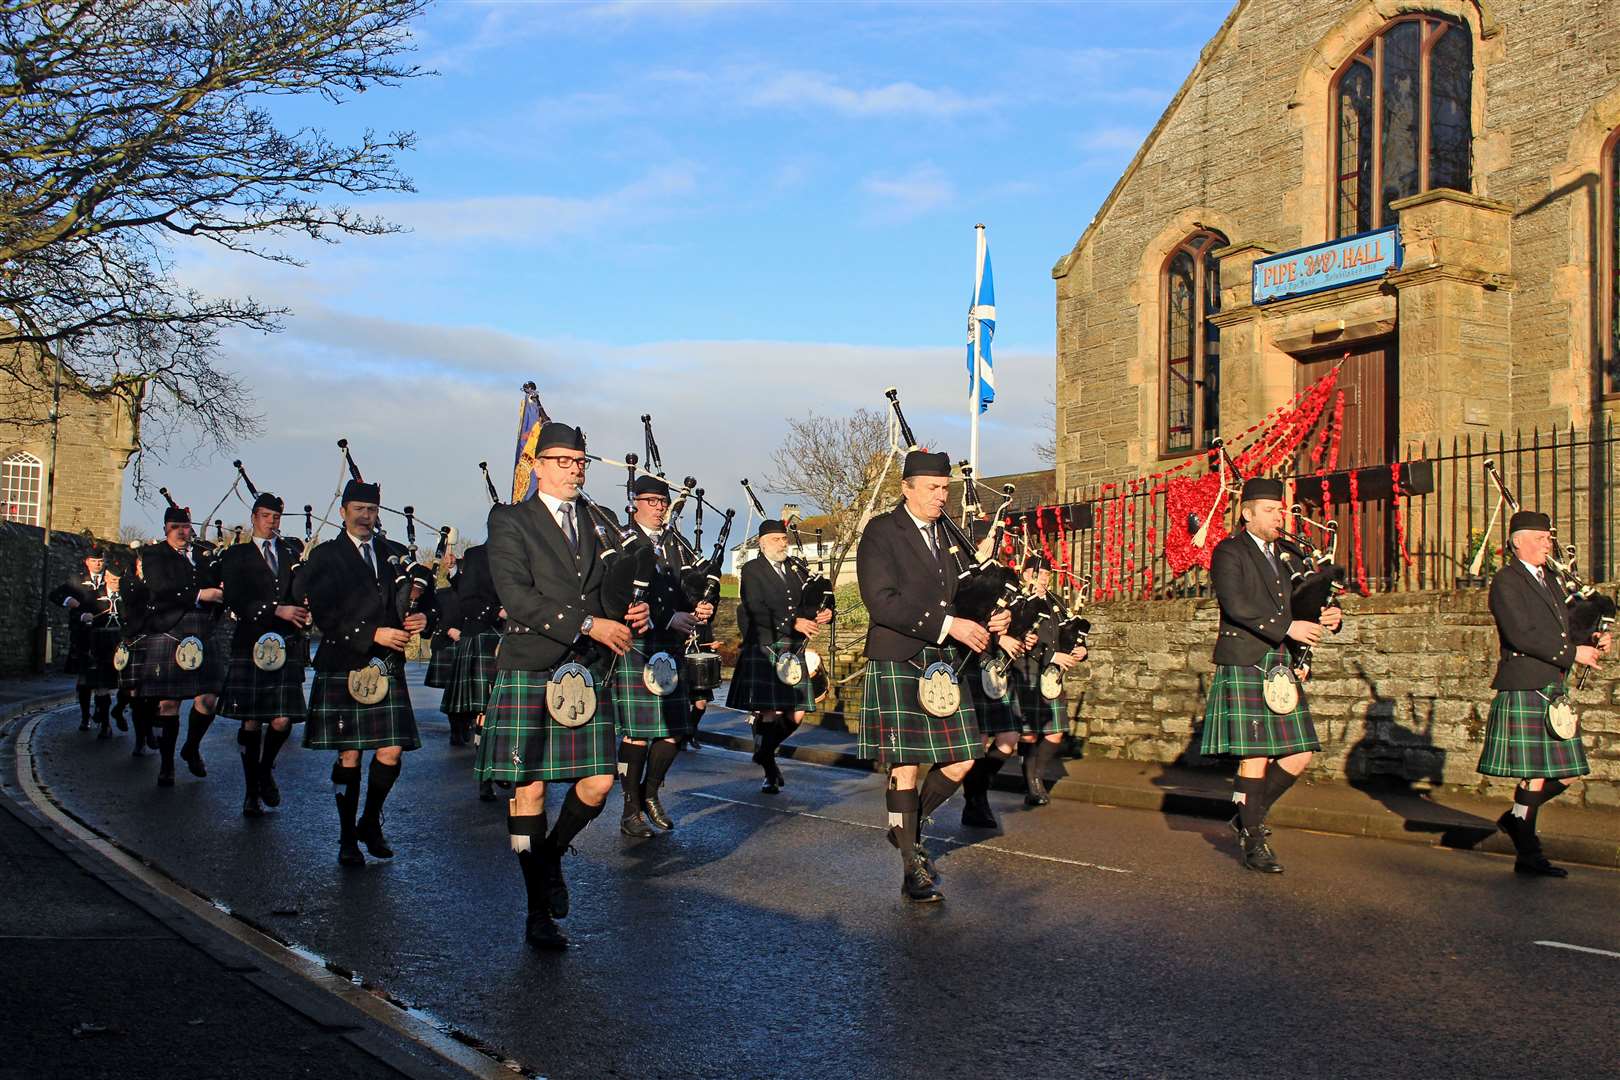 Members of Wick RBLS Pipe Band marching past the Pipe Band Hall on their way to the war memorial for the 2023 Remembrance Sunday parade. The railings outside the hall had been decorated with poppies by Caithness Community Connections. Picture: Alan Hendry